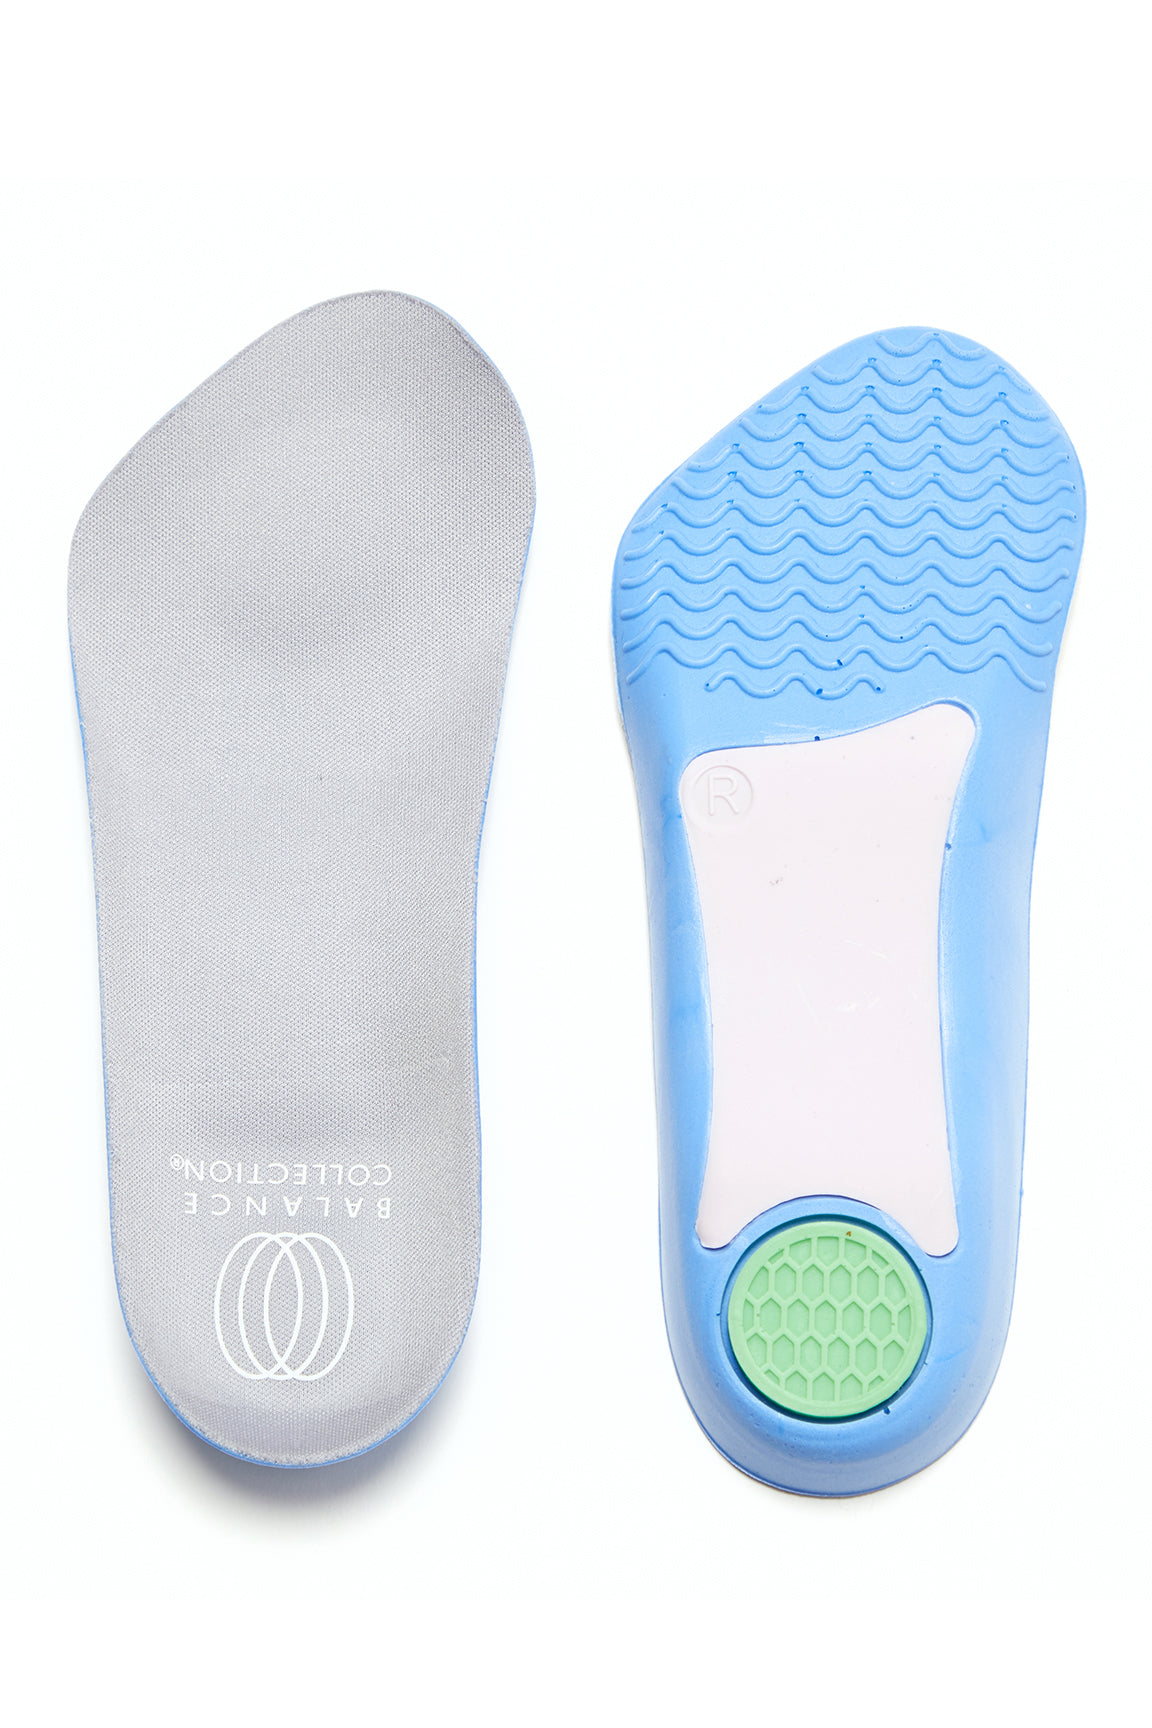 Foot Insoles (Serenity)